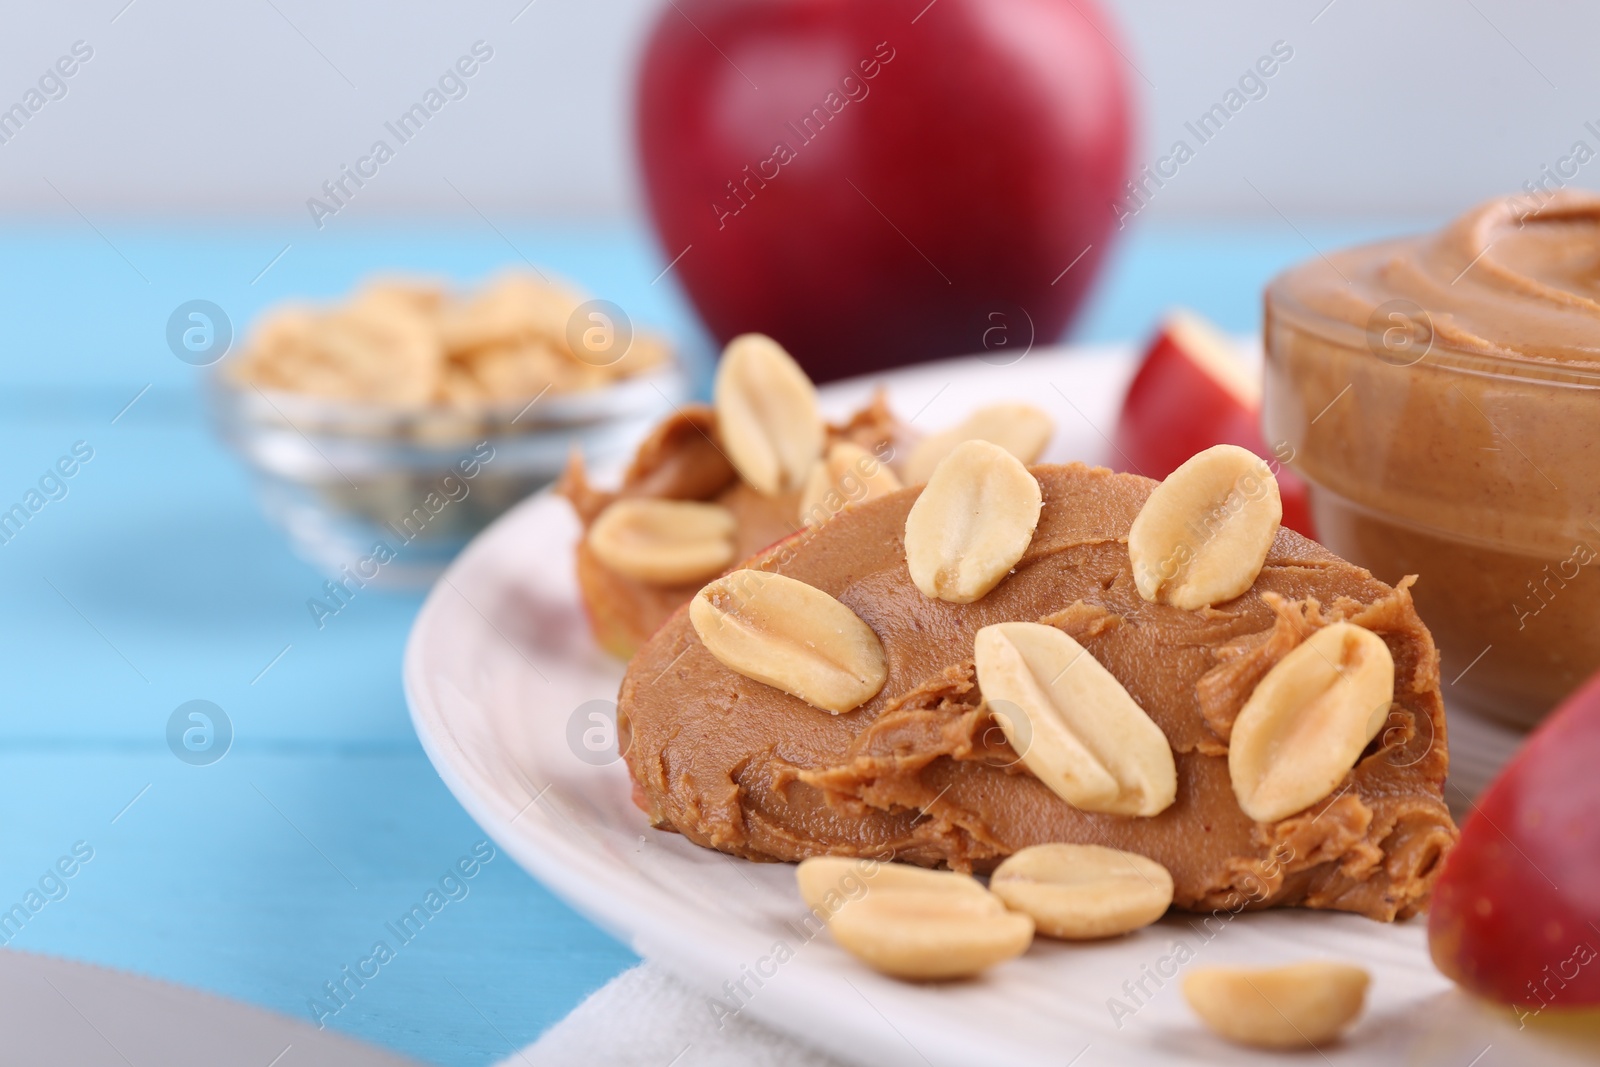 Photo of Slice of fresh apple with peanut butter and nuts on light blue wooden table, closeup